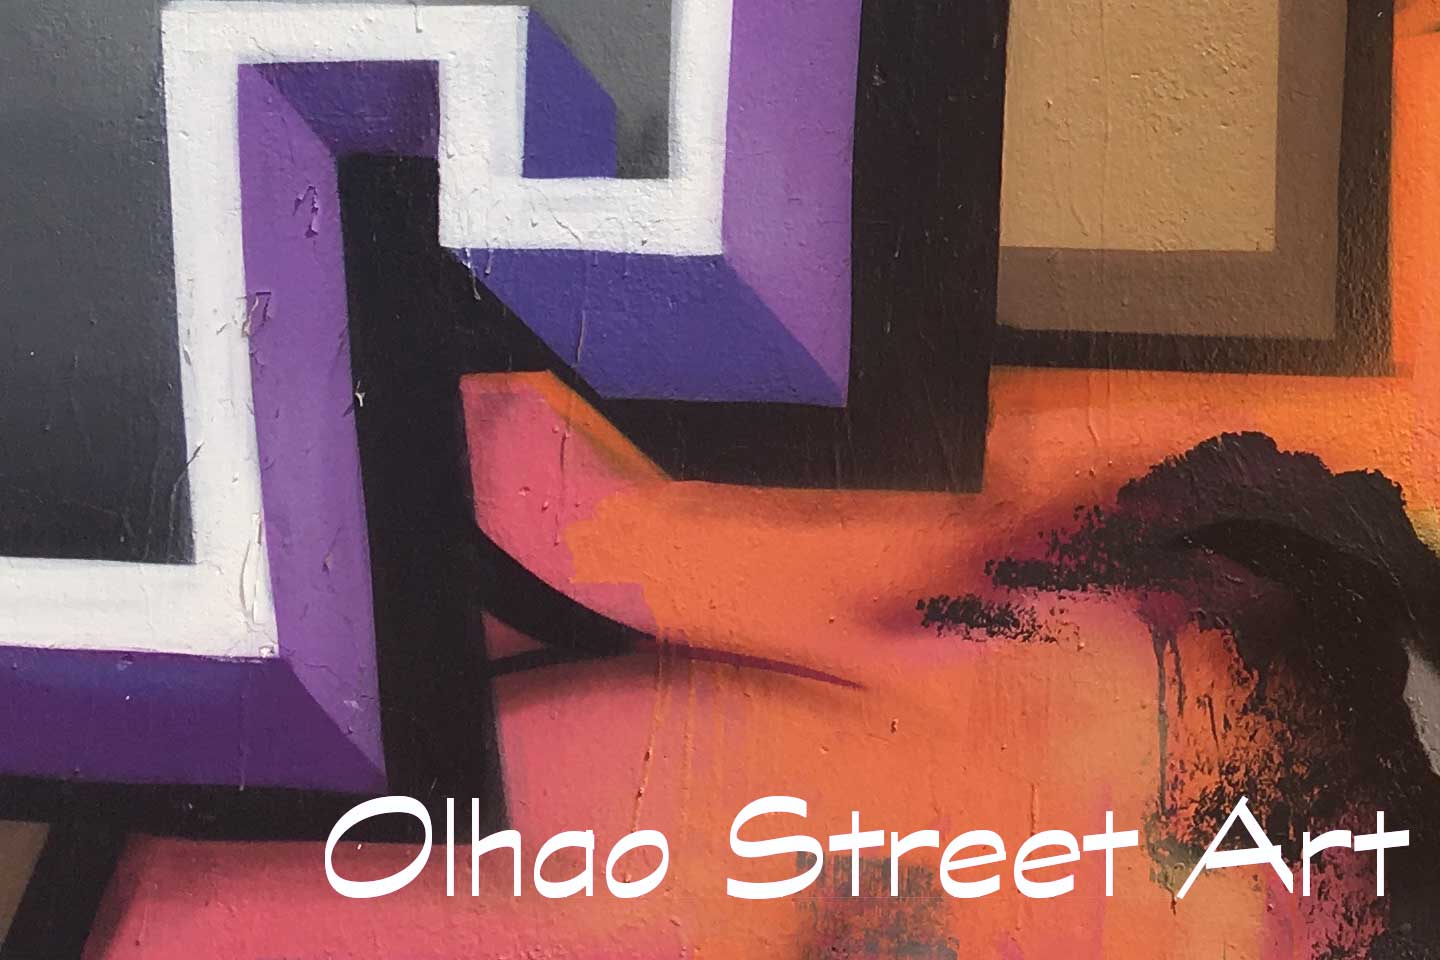 A Photo of Olhao Street Art - purple, white and red shapes shapes